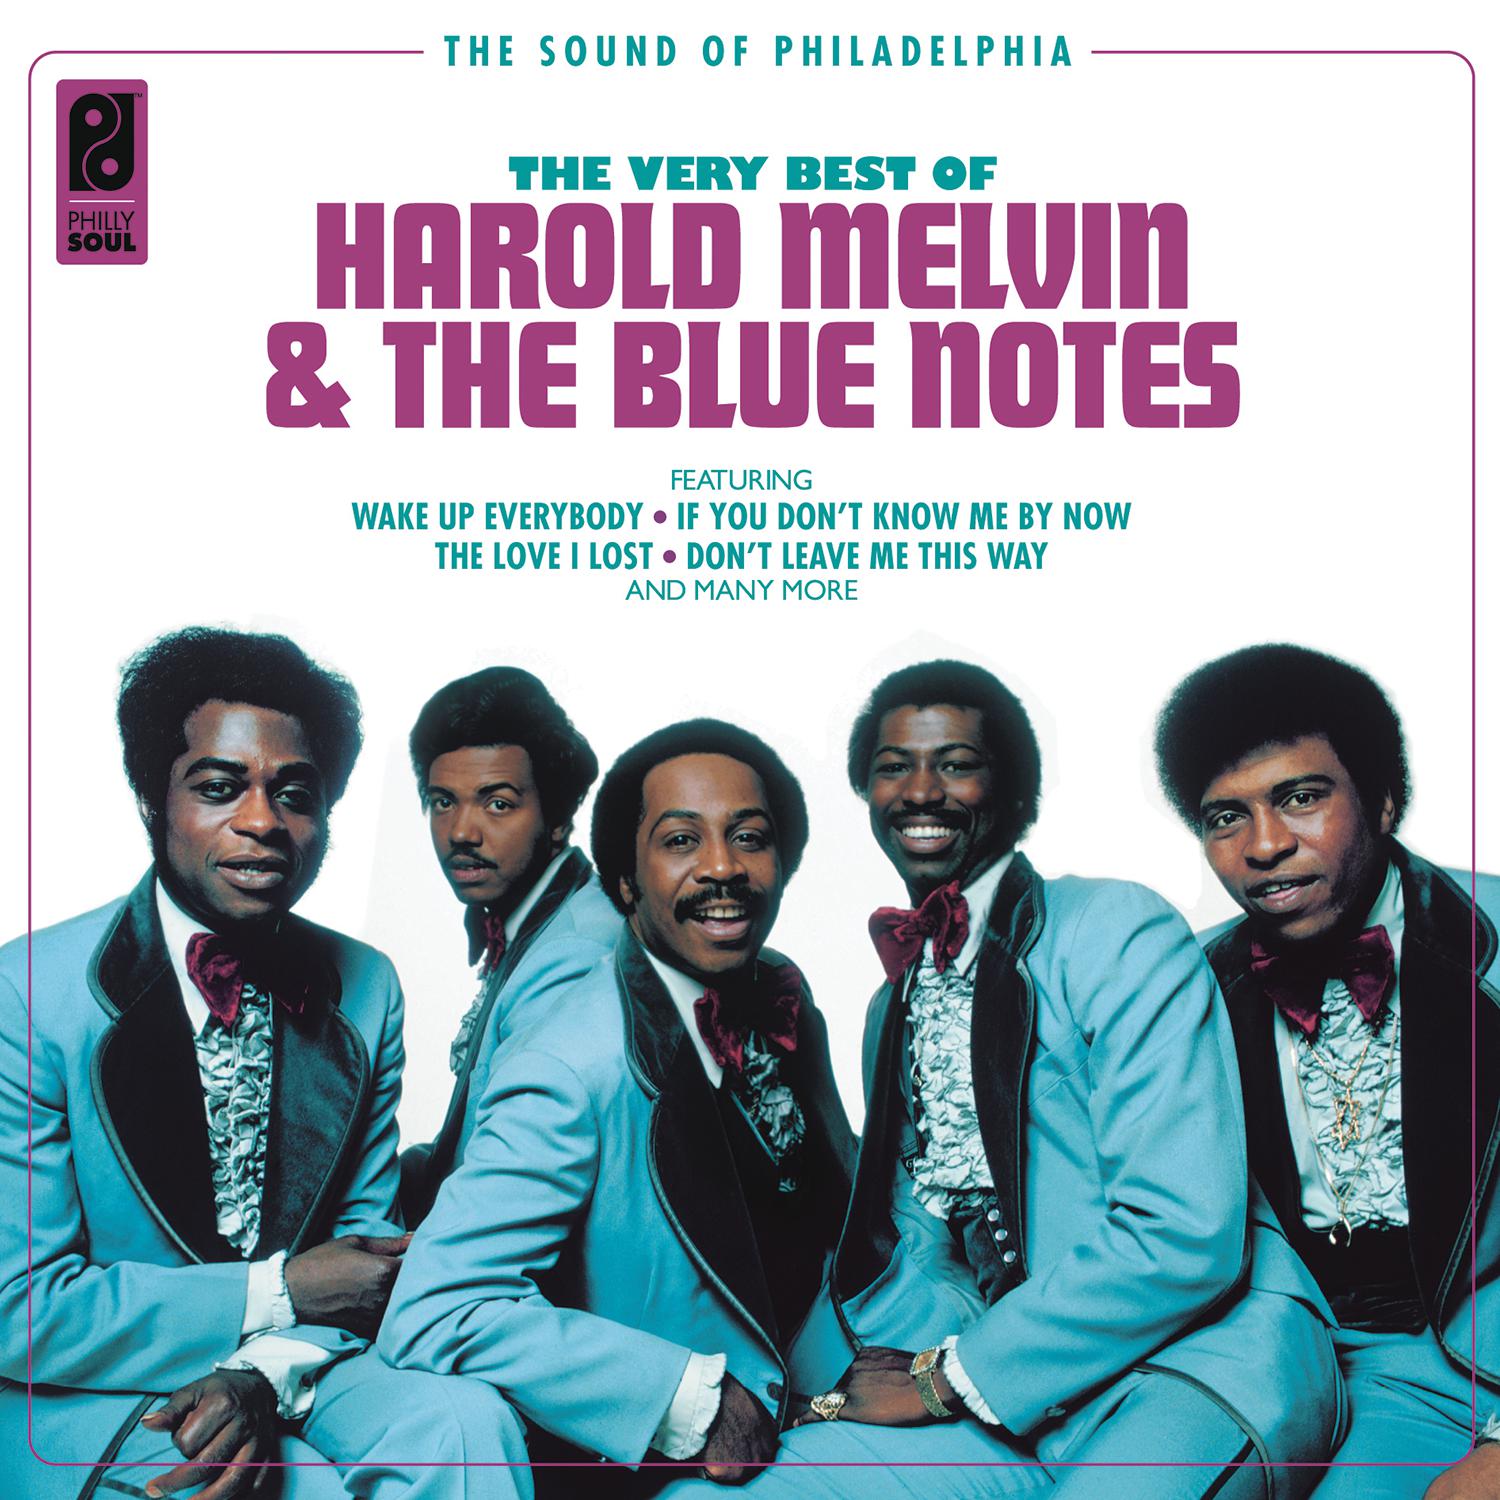 Harold Melvin & The Blue Notes – The Very Best Of